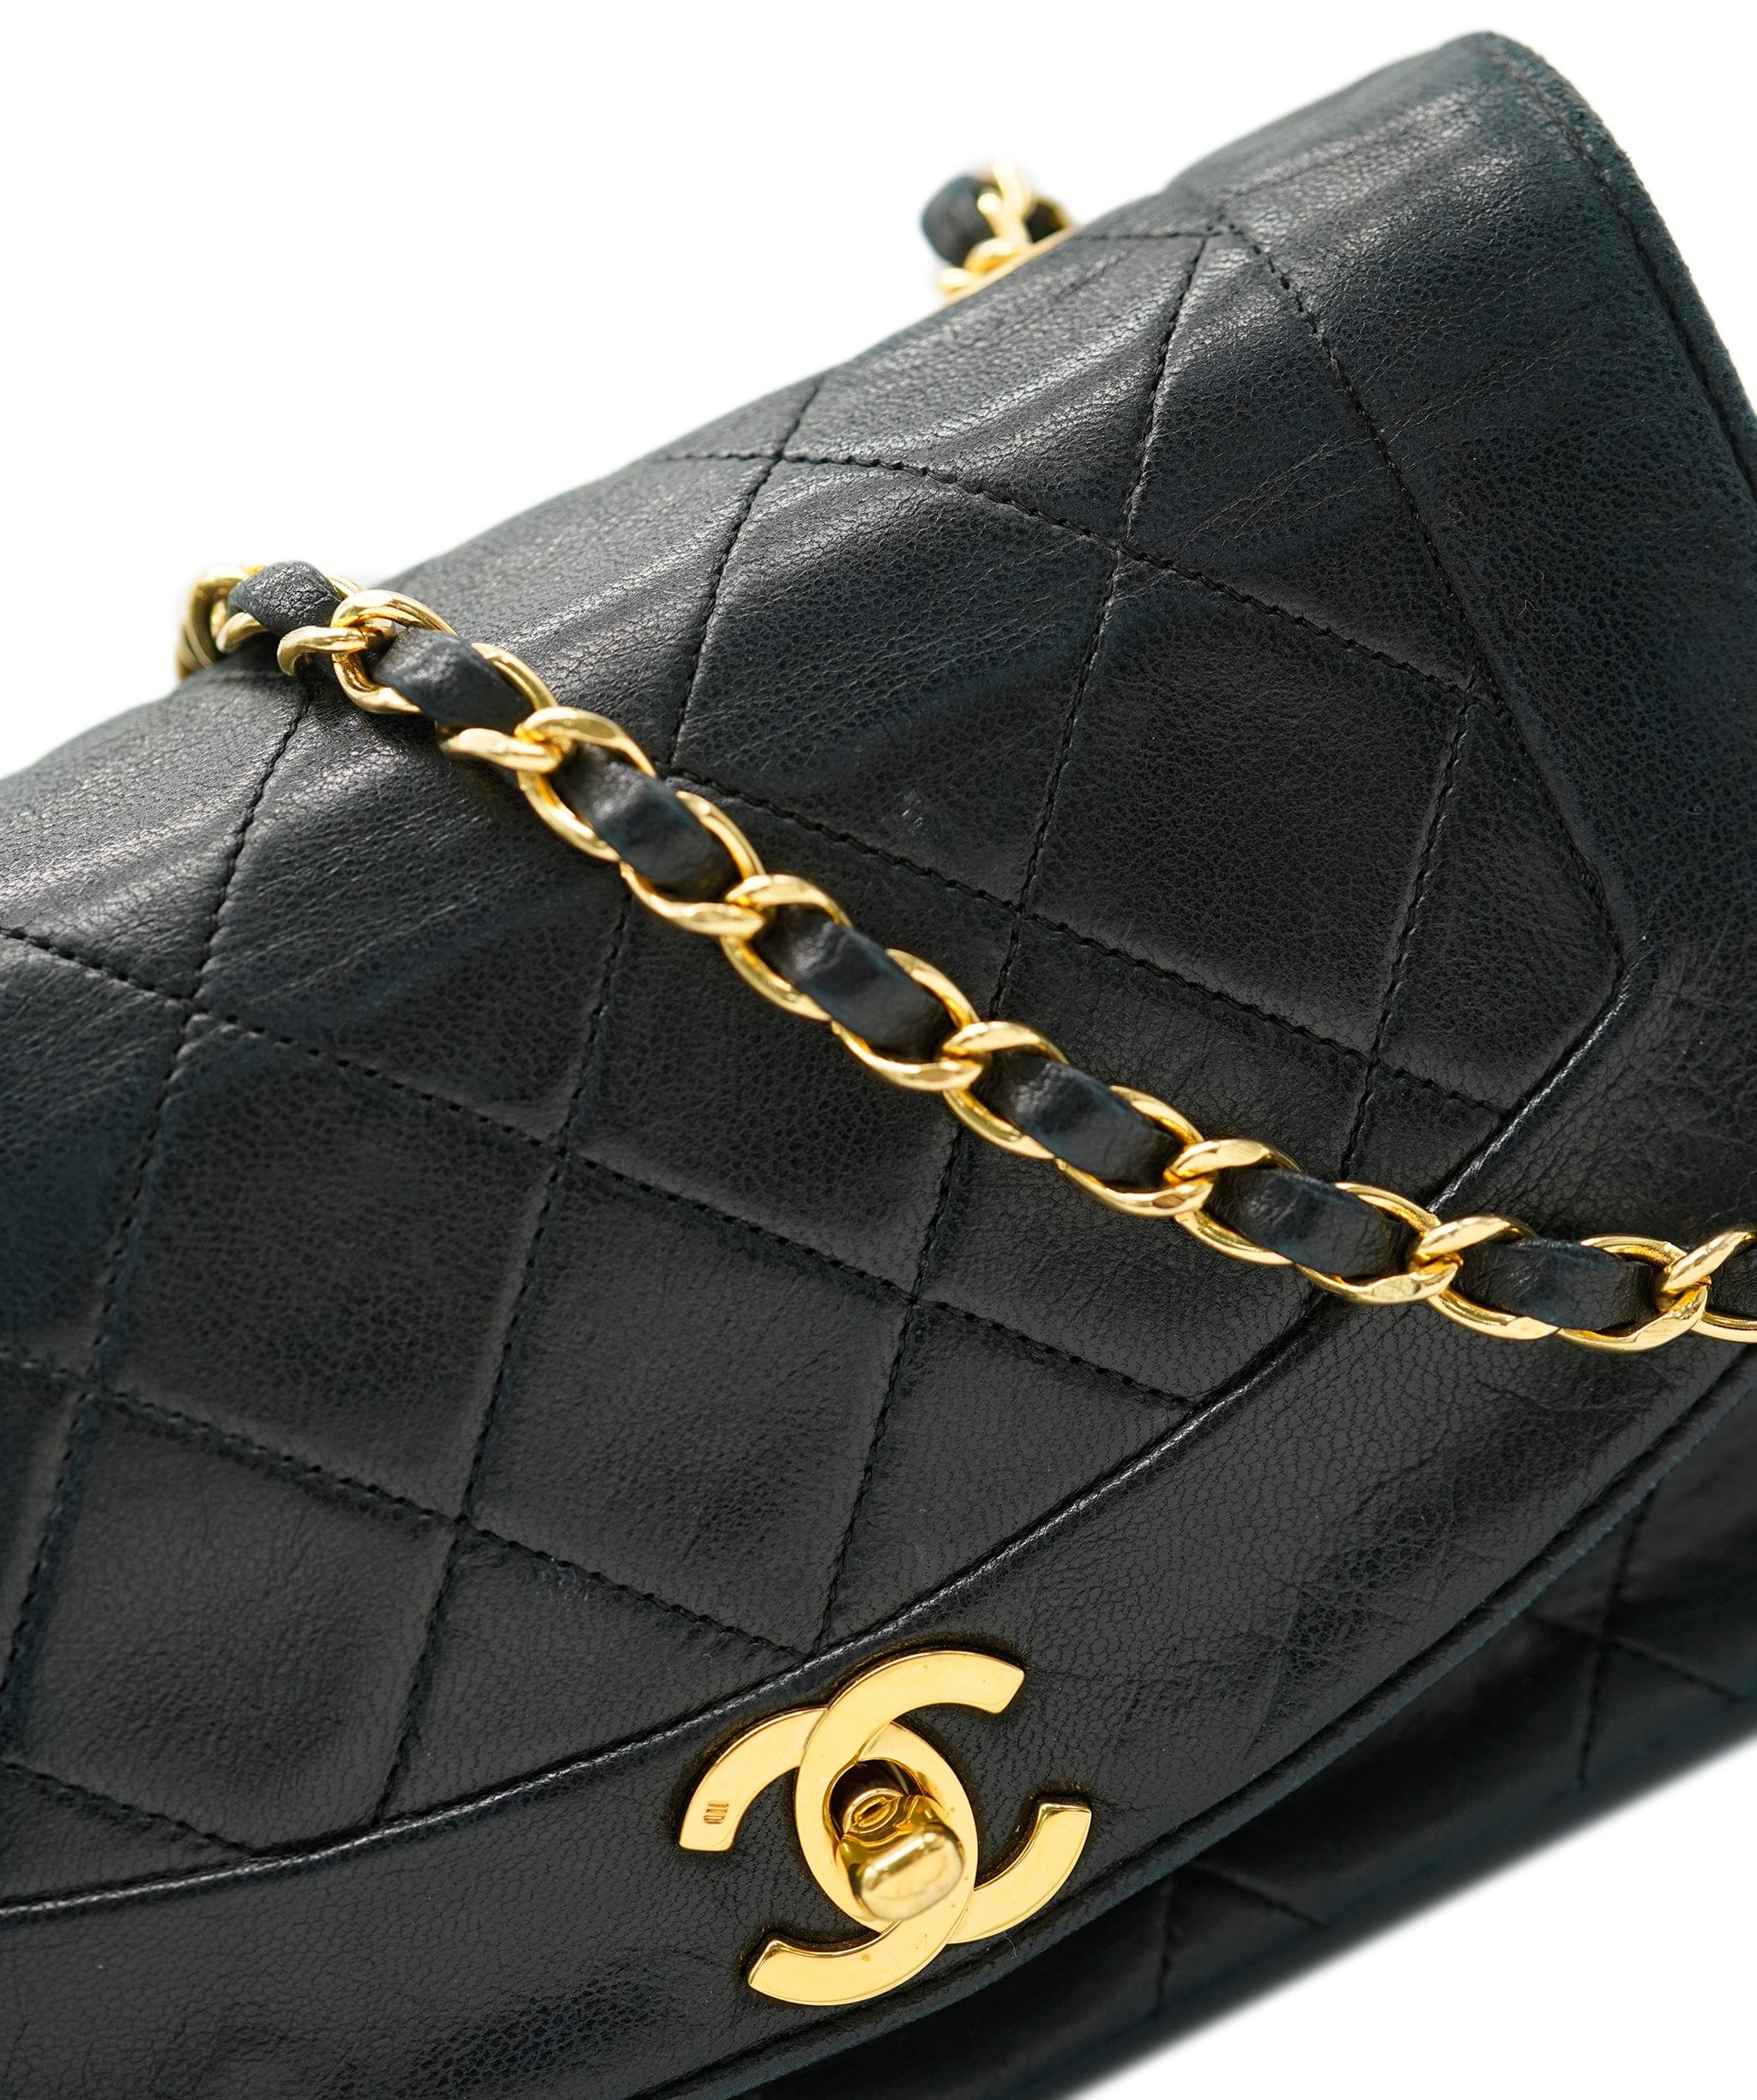 Chanel Chanel small diana black lambskin bag with GHW AJL0187